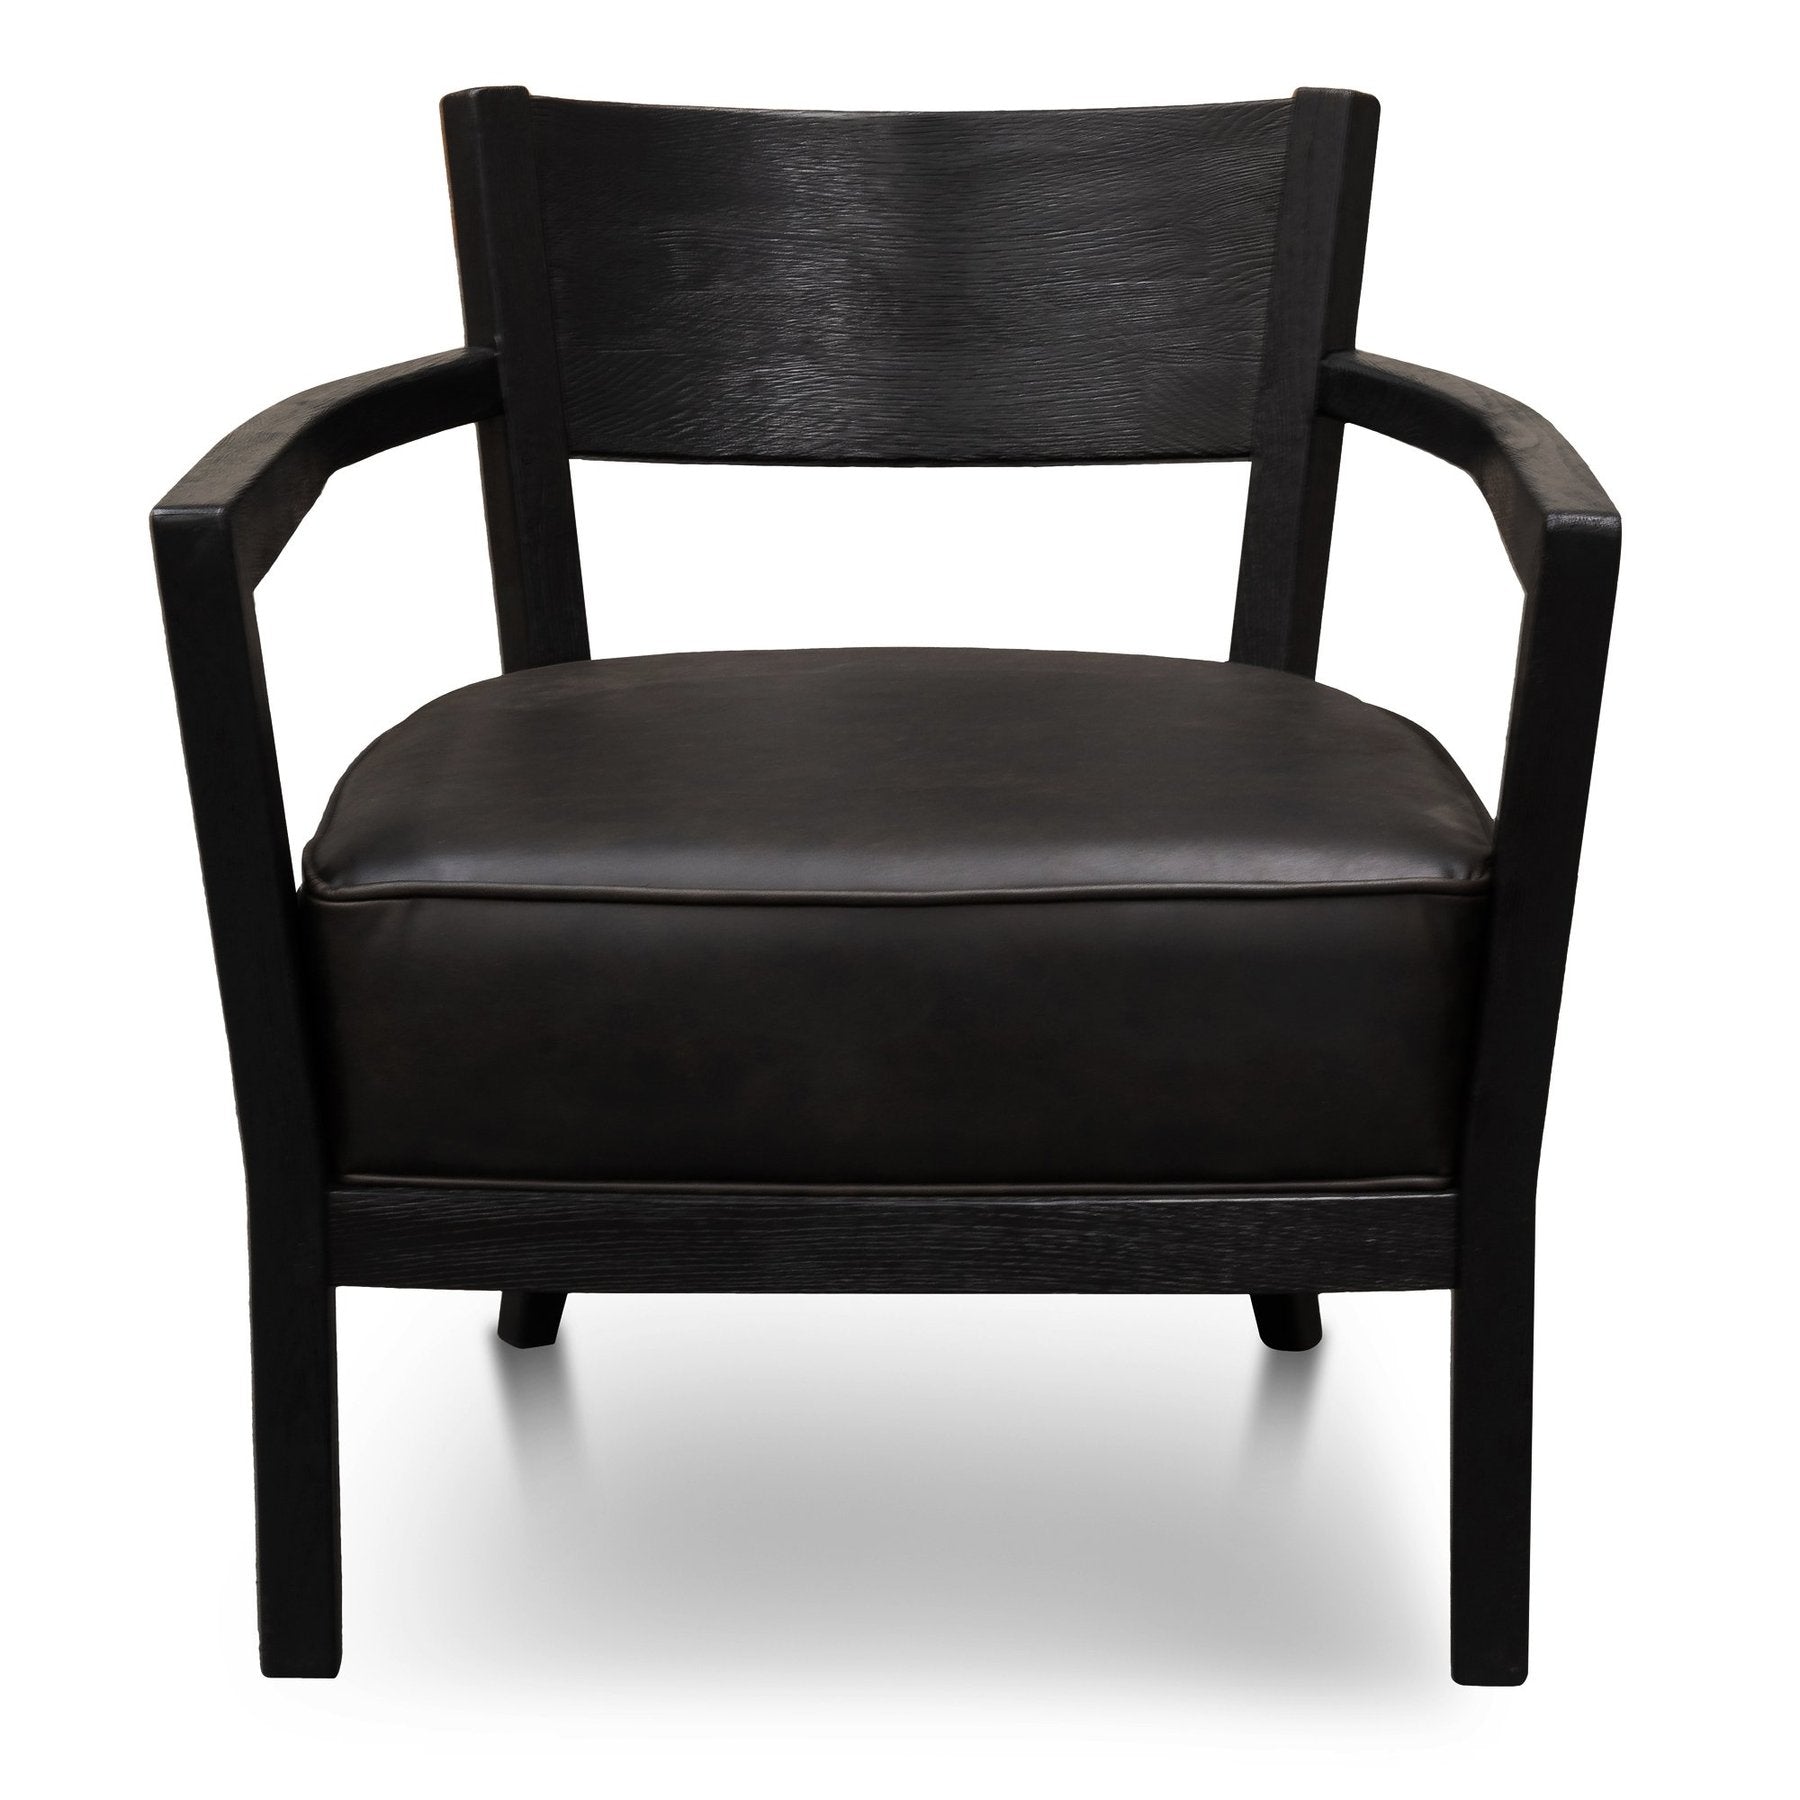 Knight Black Wooden Armchair with PU Leather Seat - Notbrand